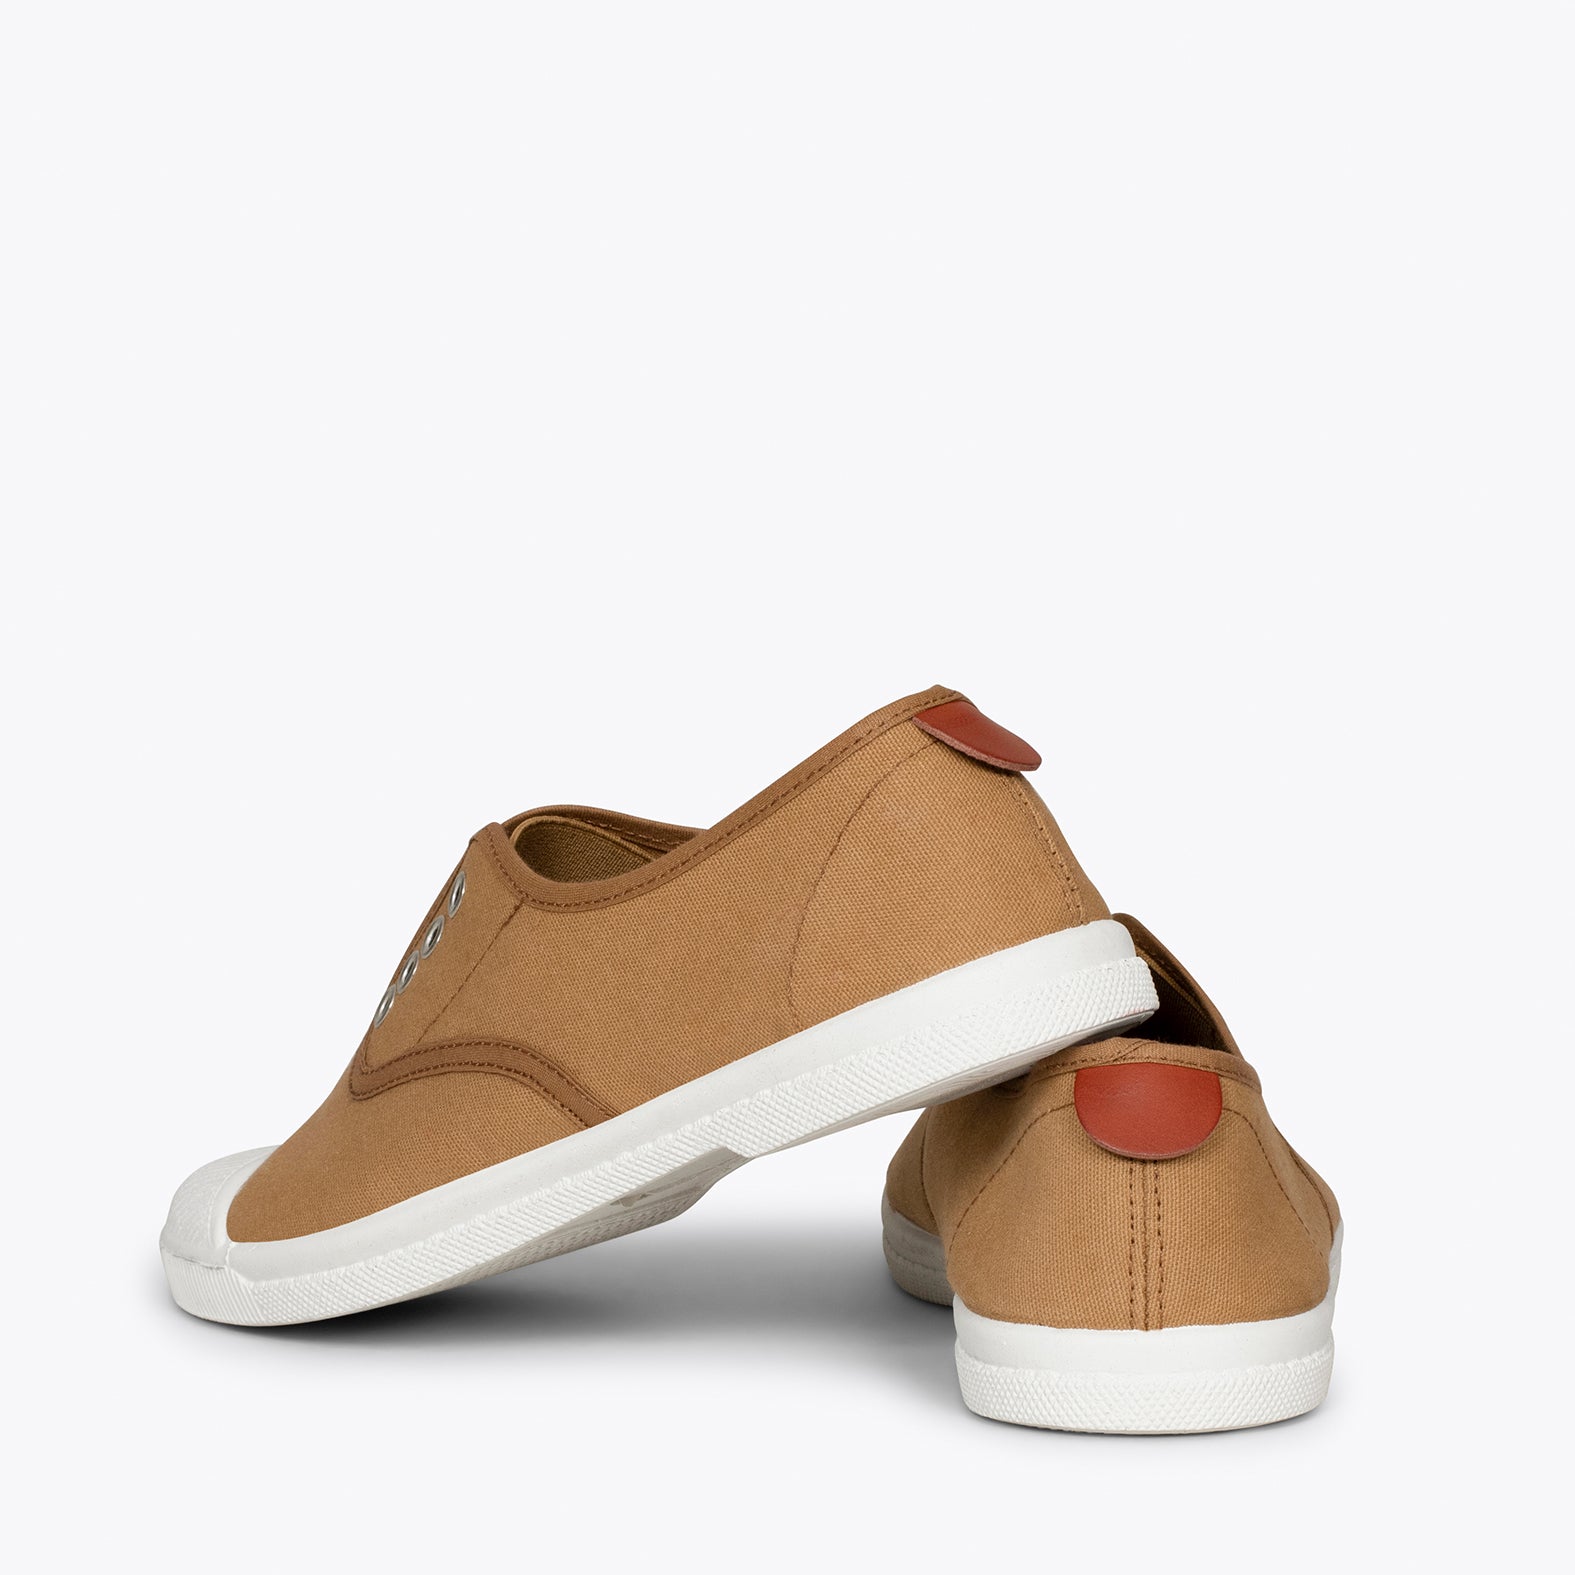 WAY – TAUPE sneakers with elastic